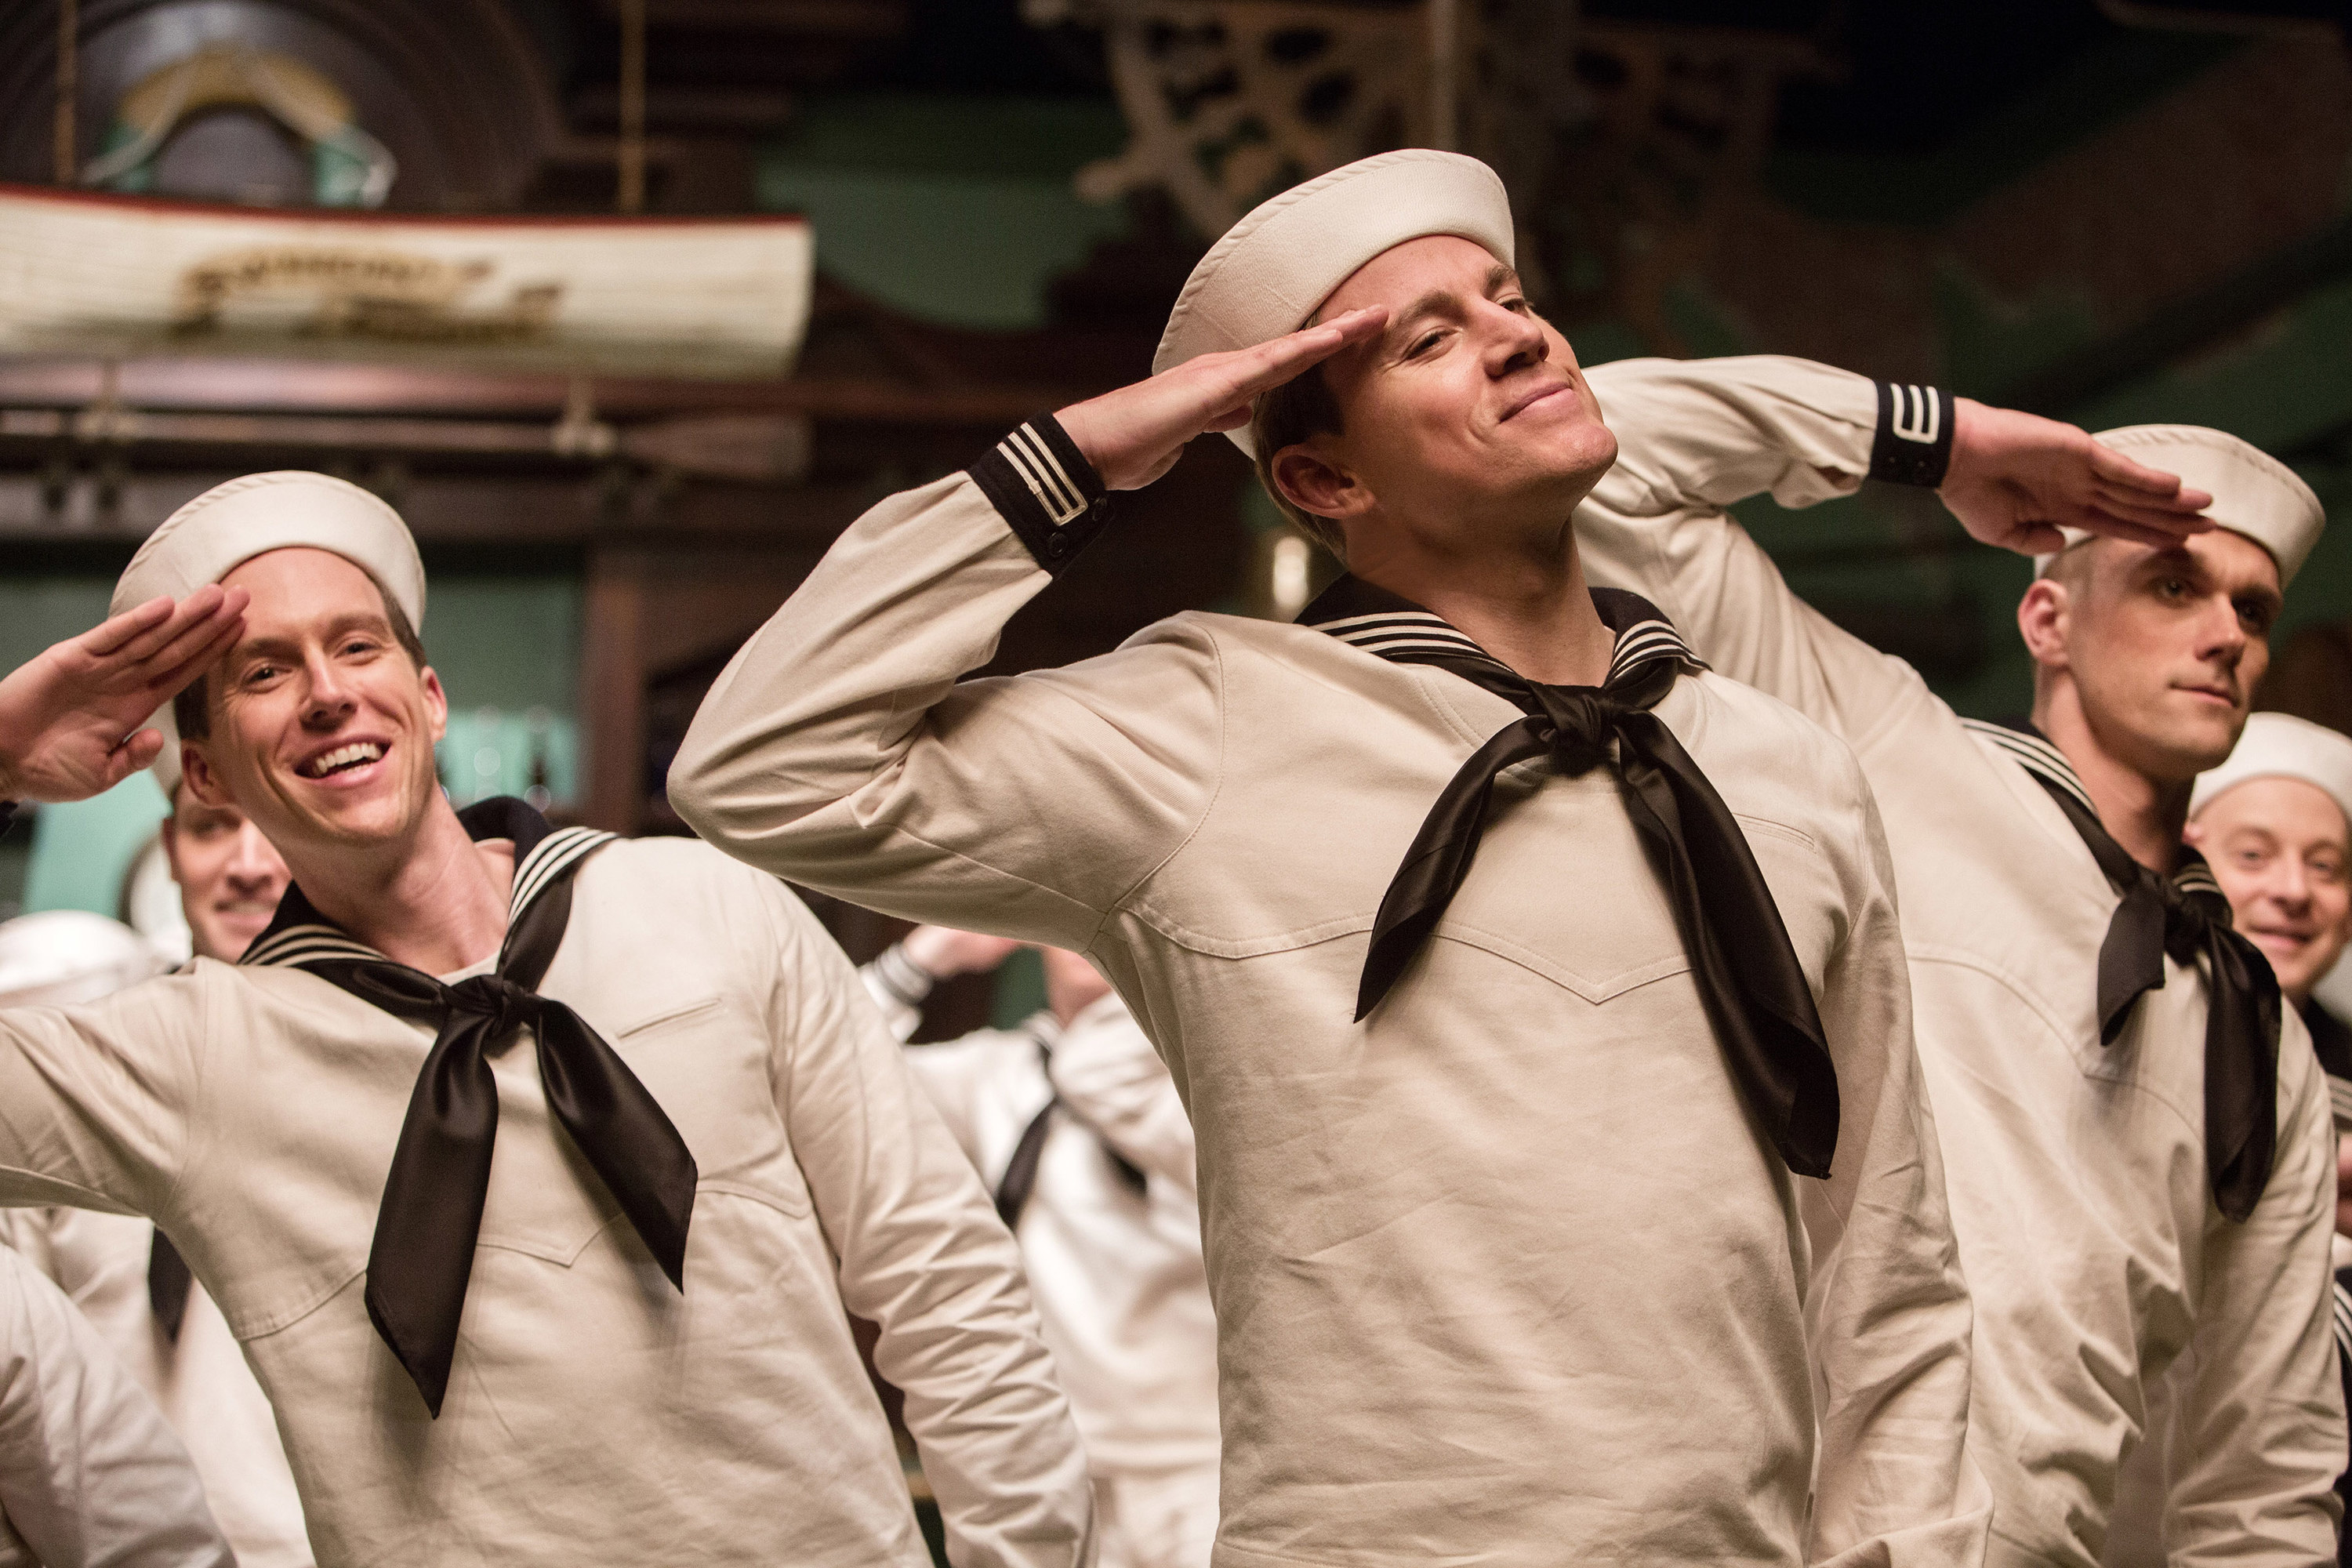 Tatum in a sailor outfit saluting with other sailors